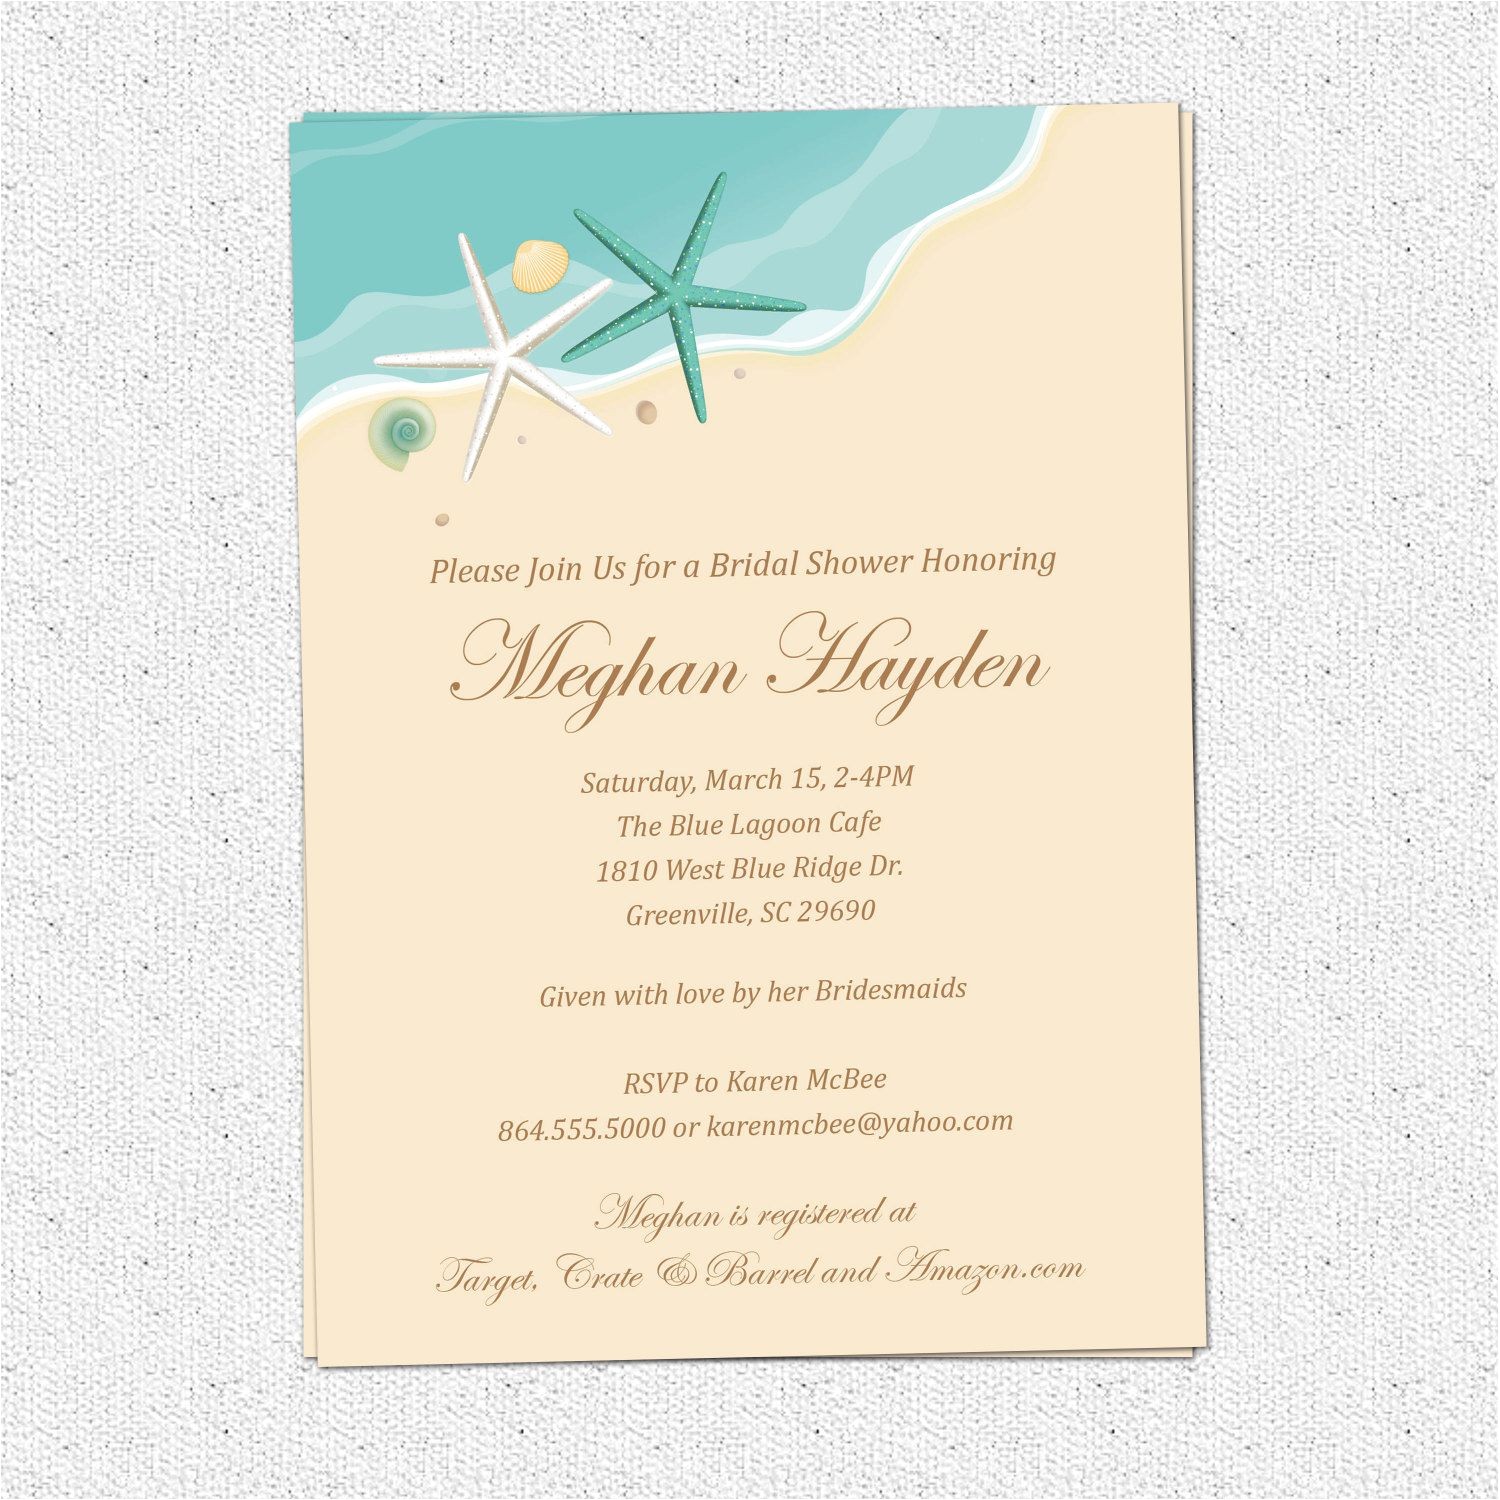 How to Make Bridal Shower Invitations Create Bridal Shower Invitation Wording